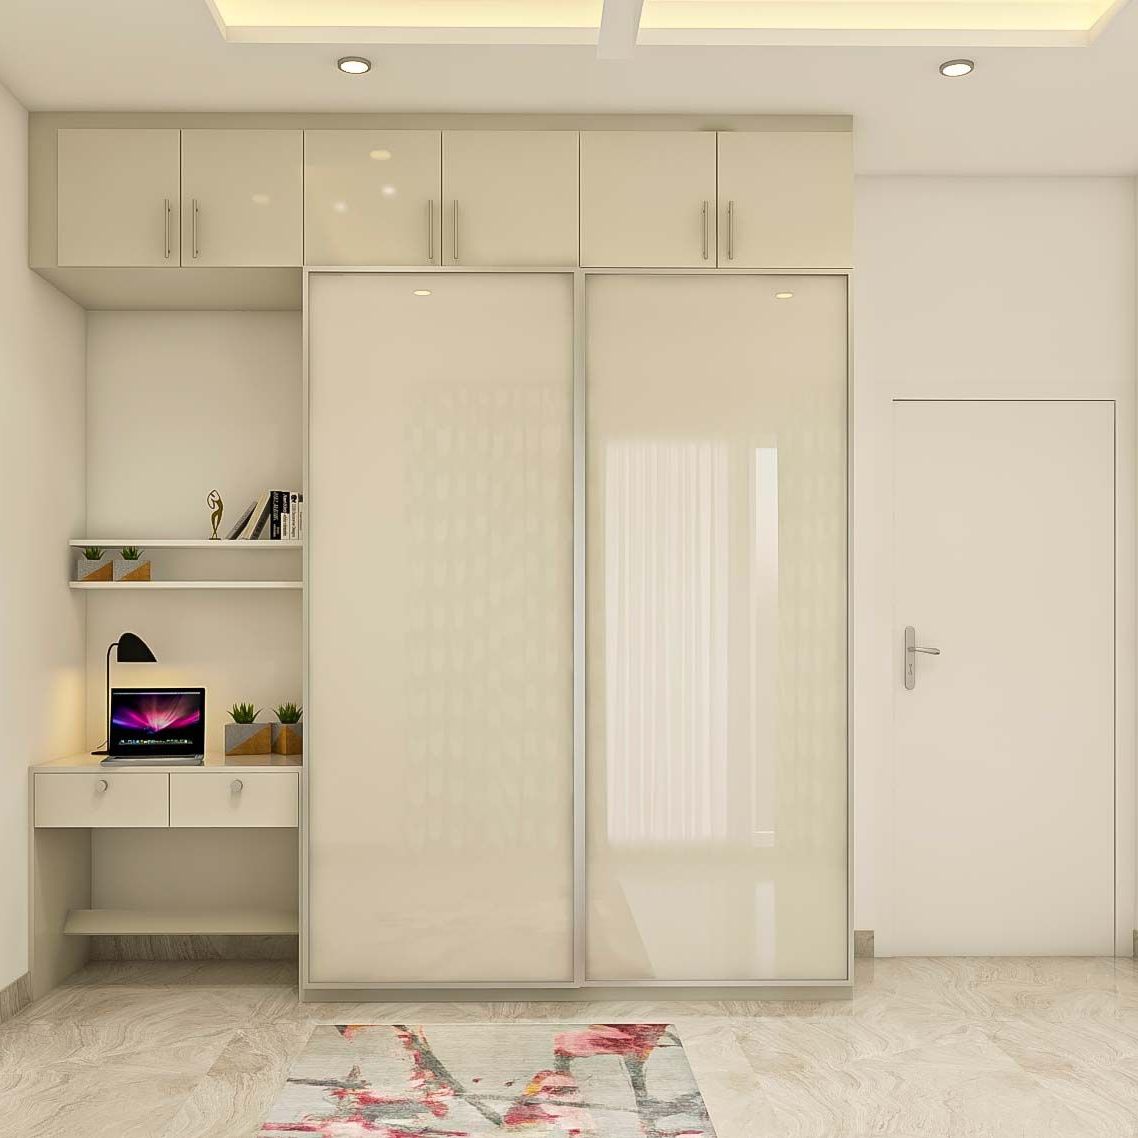 Contemporary Spacious Wardrobe With Glossy White Laminate | Livspace For Glossy Wardrobes (View 5 of 20)